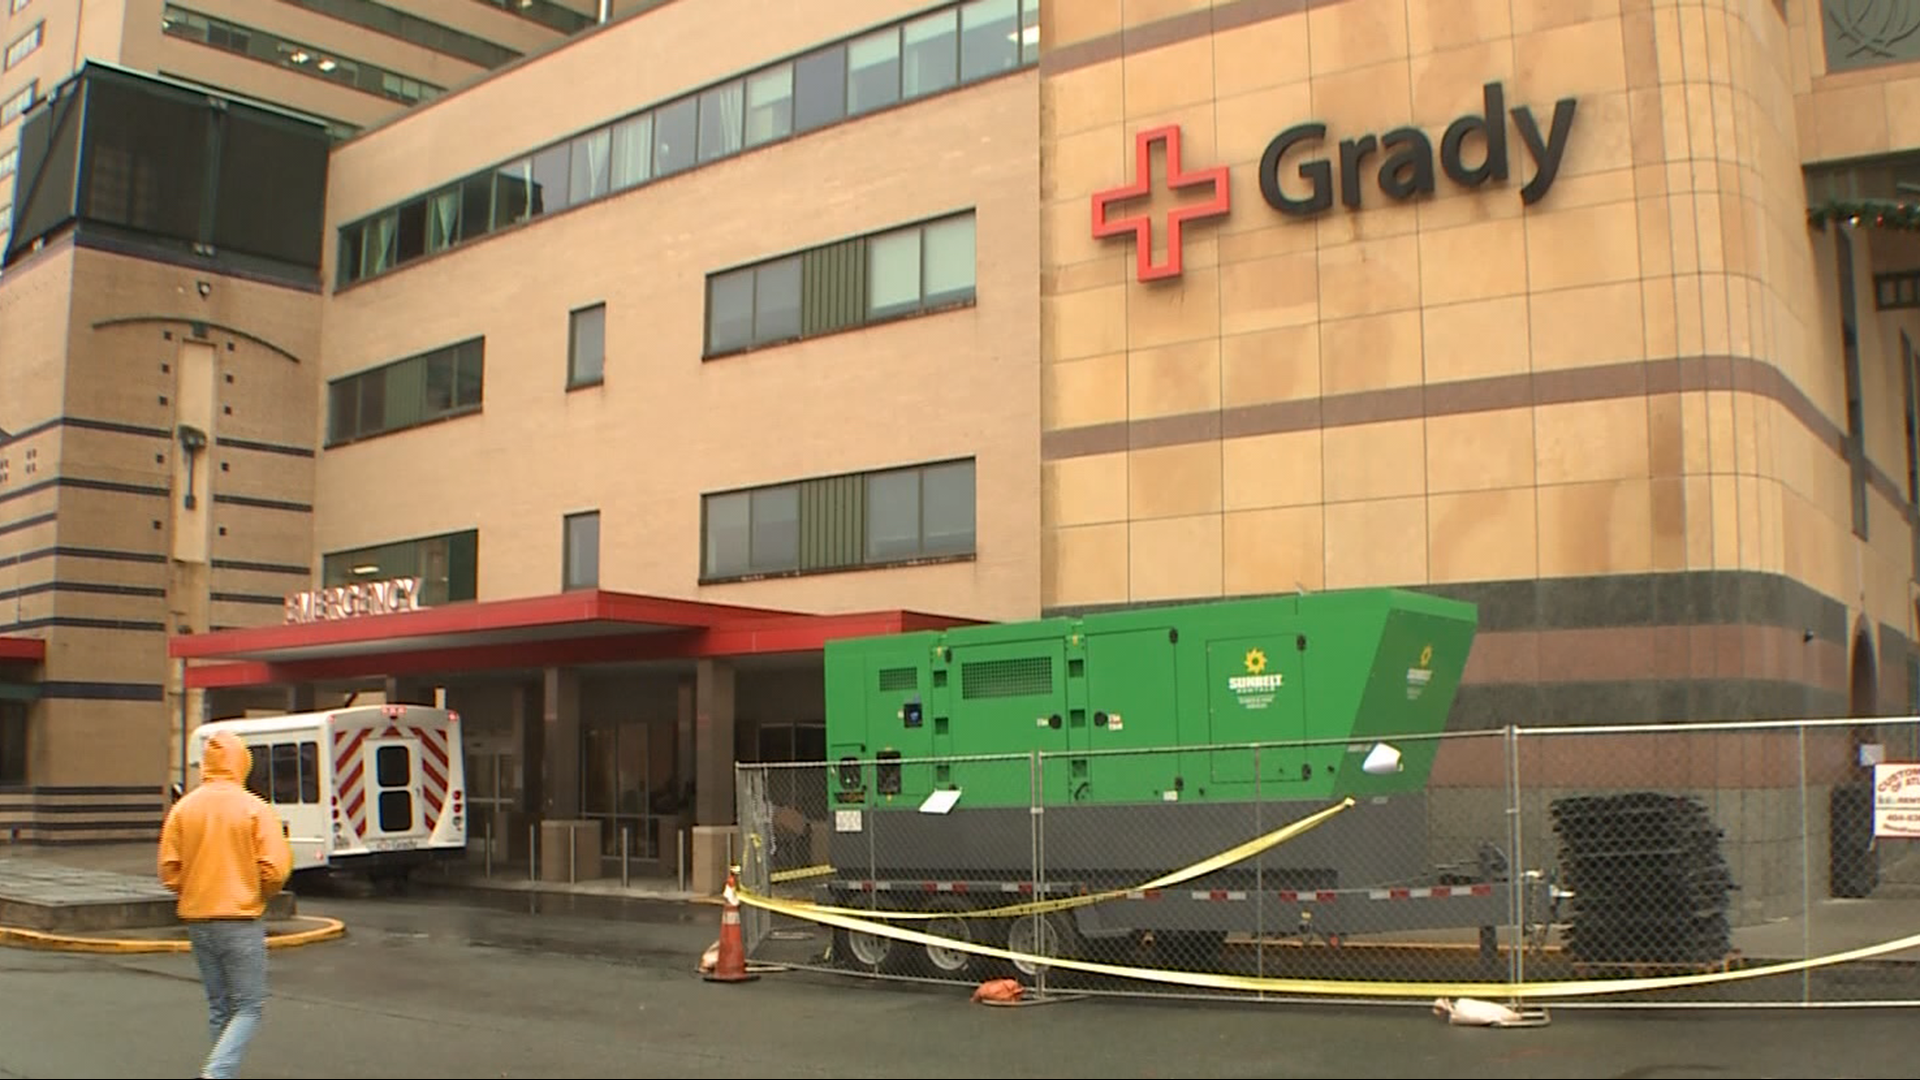 A State of Emergency has been declared for Grady Memorial Hospital in downtown Atlanta after a pipe burst last week, causing major flooding.